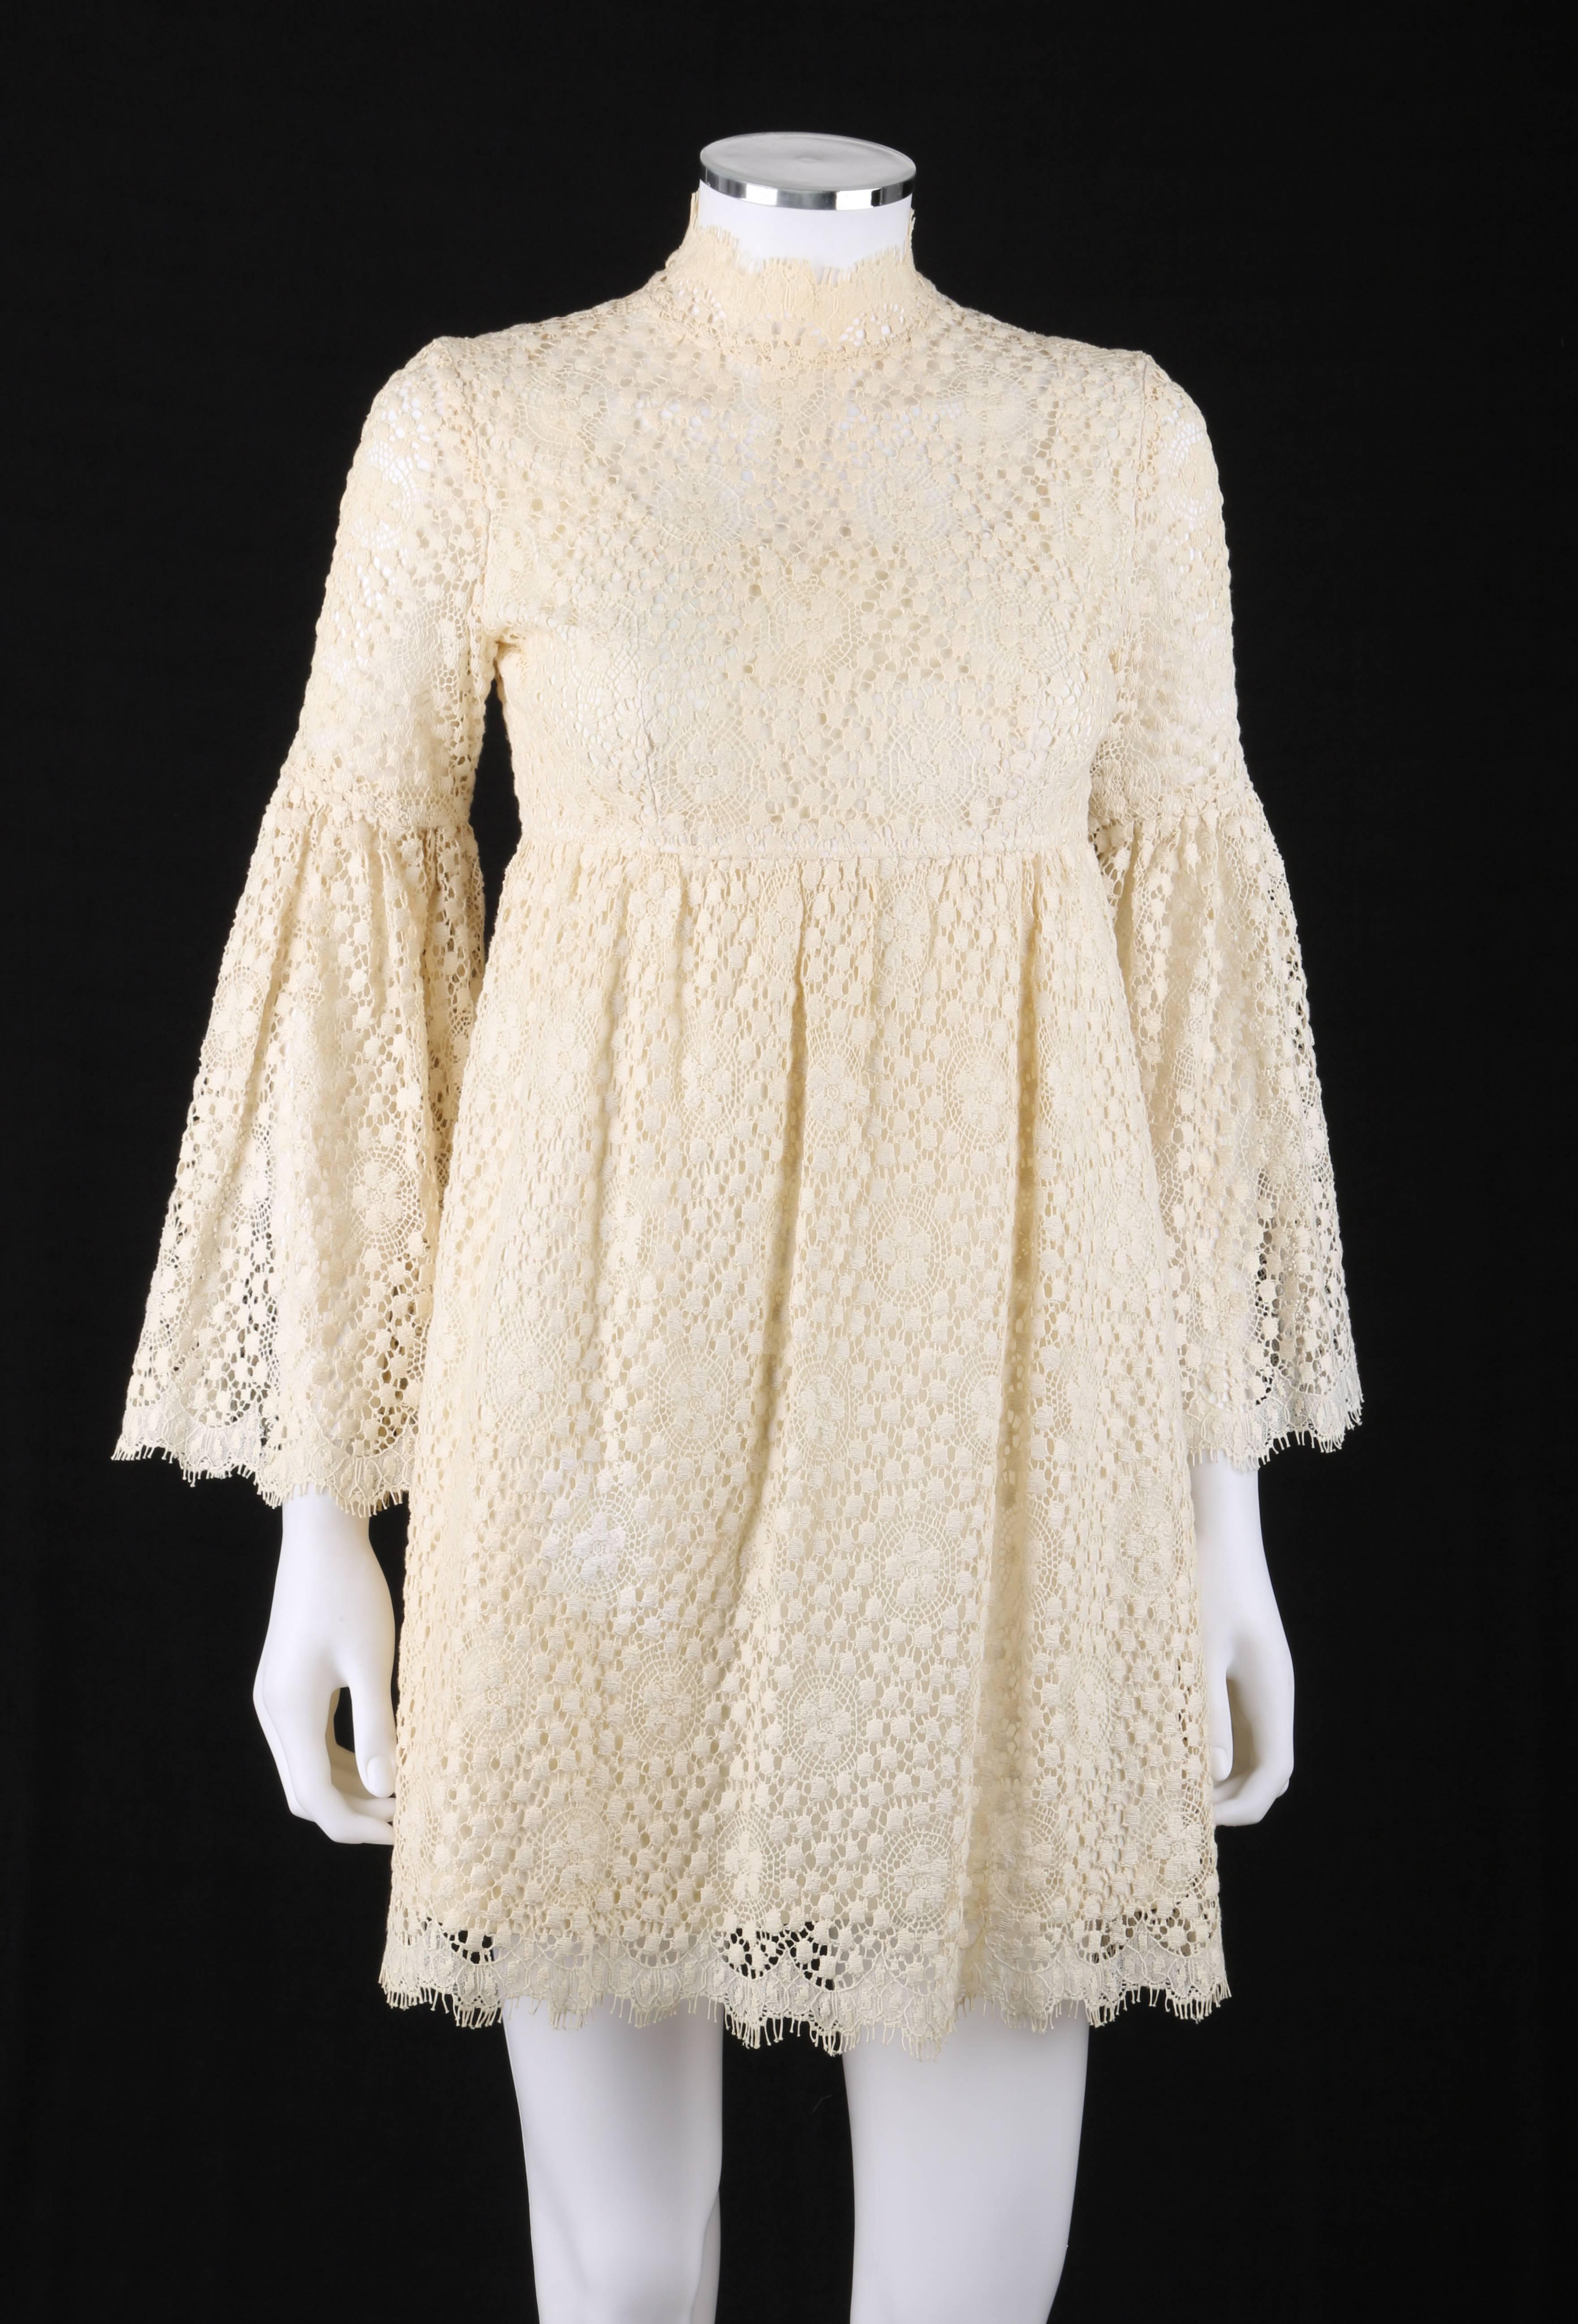 Vintage Parc Jrs. Petite c.1960's cream floral crochet lace flounce sleeve babydoll dress. The epitome of bohemian / flower child dress. Mandarin collar. Empire waist. Long sleeves with flounce at elbow. Gathered waistline skirt. Scallop edge with